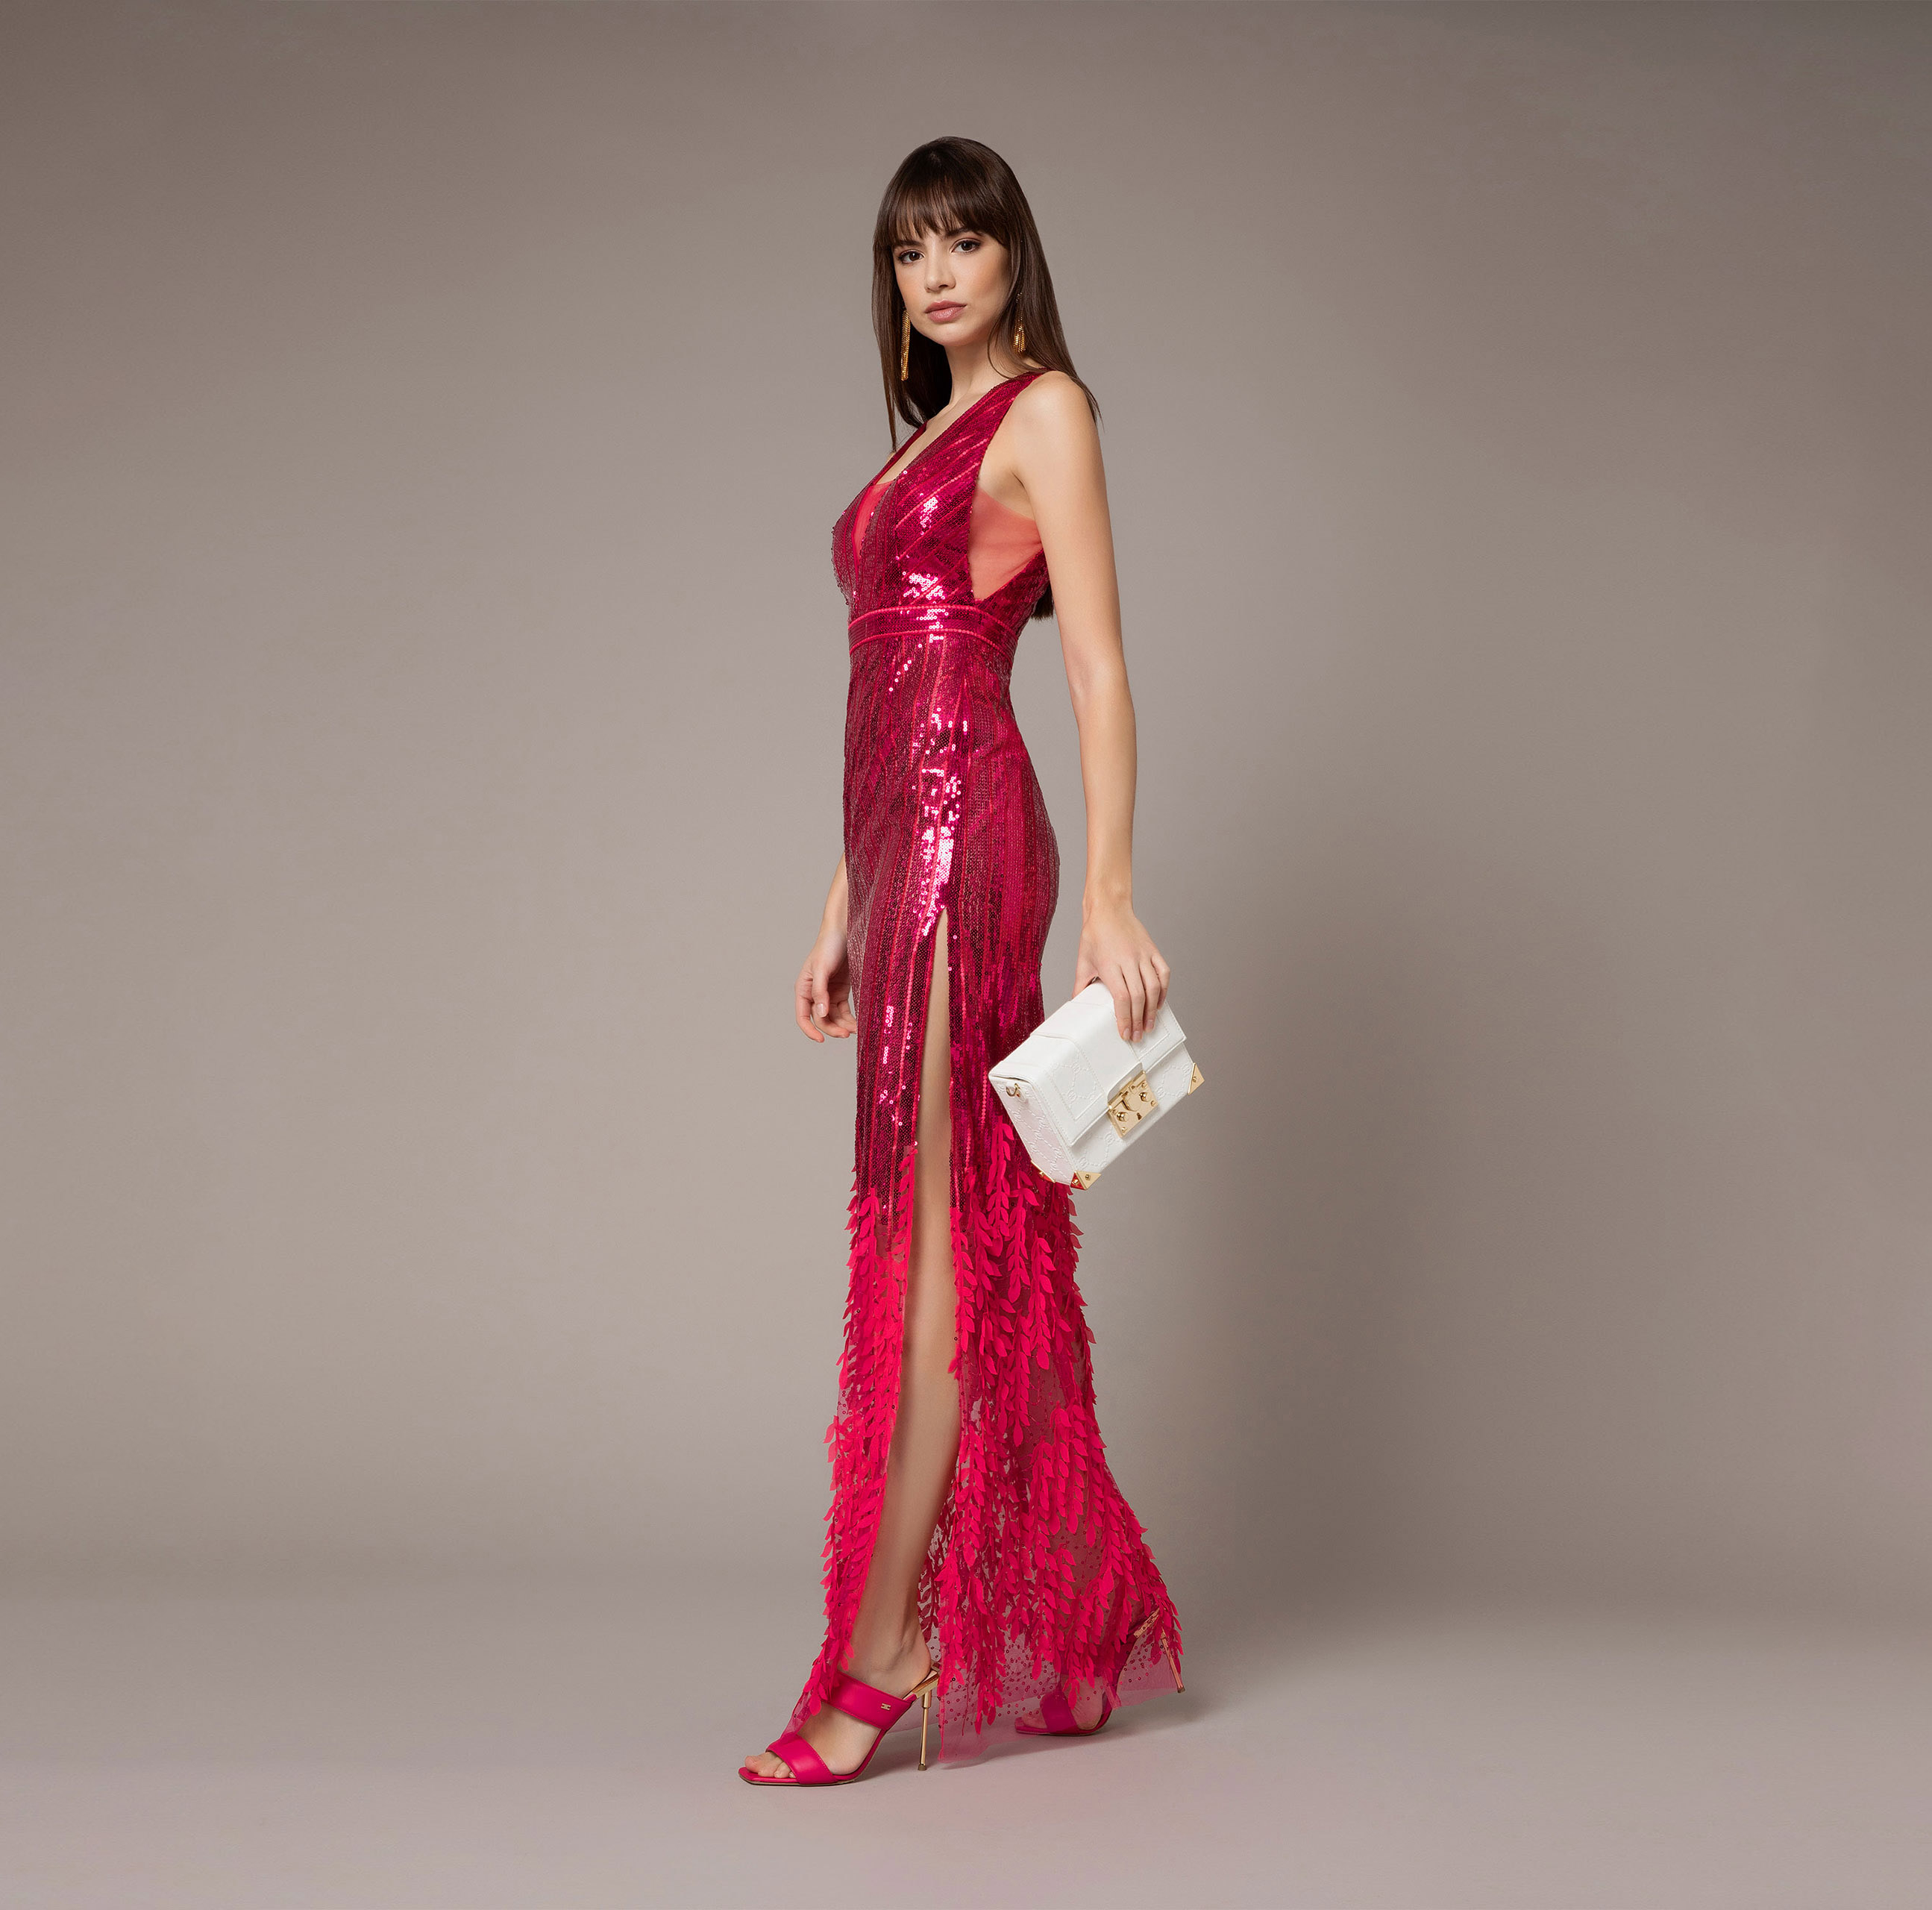 Red carpet dress in sequins with leaves - Elisabetta Franchi